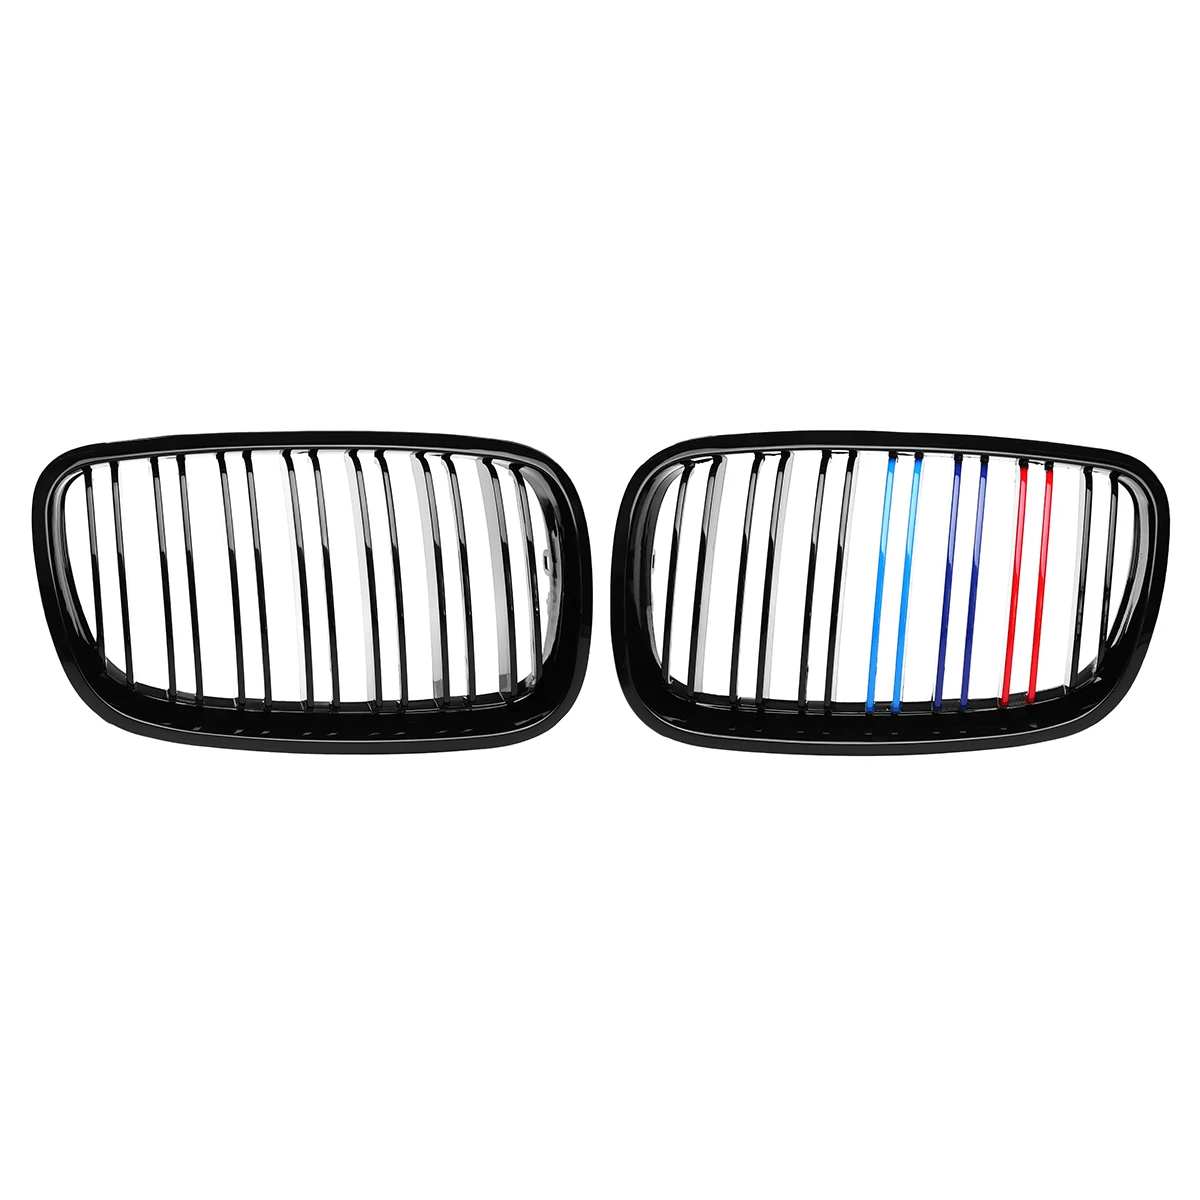 A Pair For 2007-2013 For BMW X5 X6 E70 E71 Car Front Bumper Grille Grill Cover Trim Kidney Glossy Black M-Color